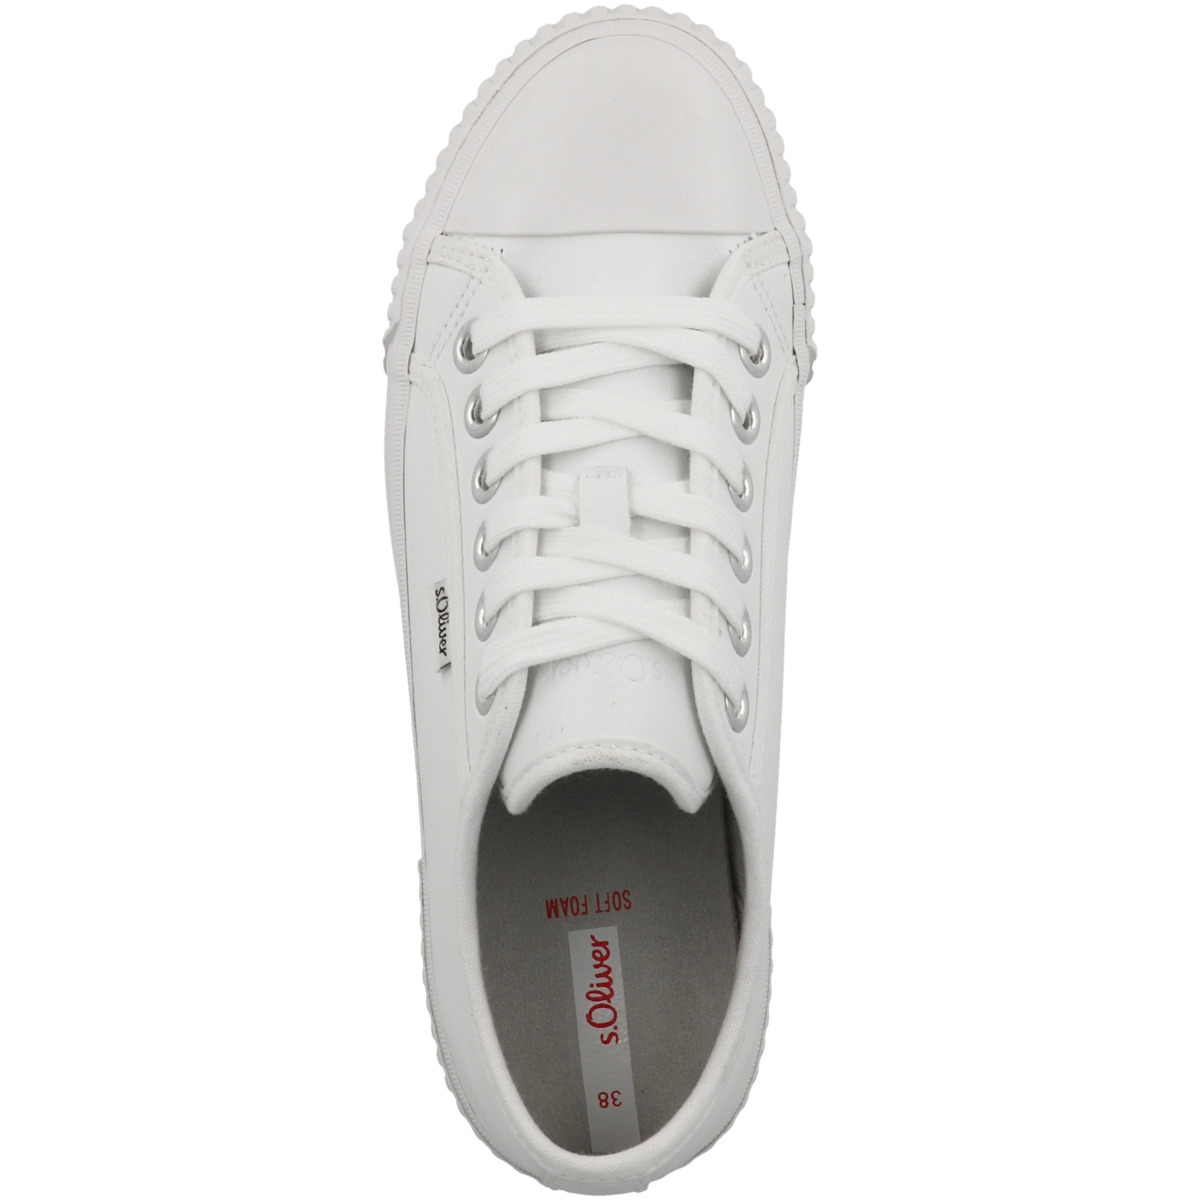 s.Oliver 5-23620-39 Sneaker weiss